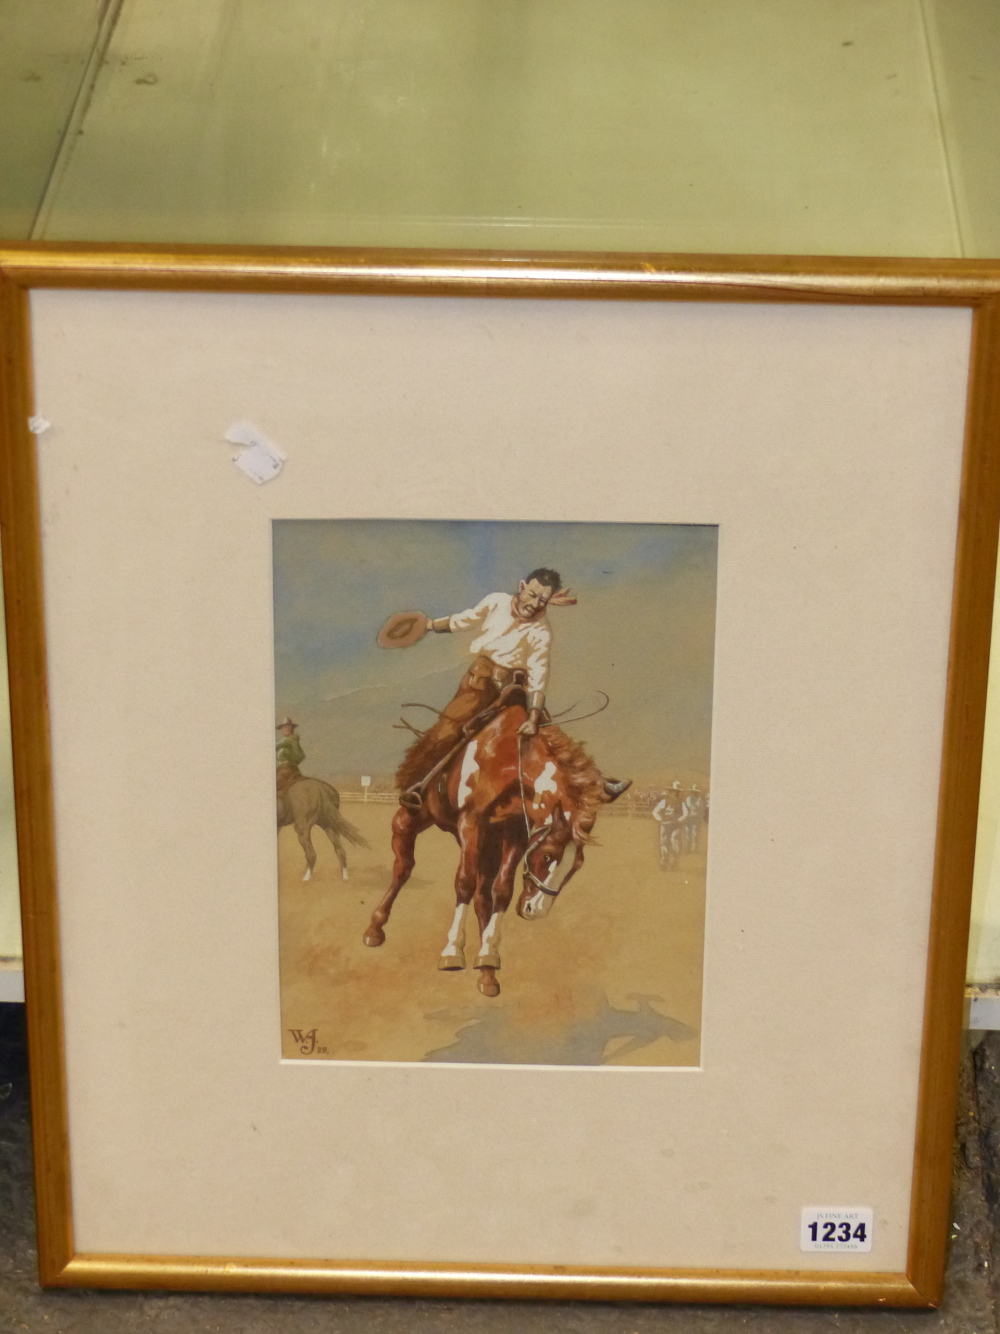 EARLY 20th.C. ANGLO AMERICAN SCHOOL. THE BRONCO BUSTER, INITIALLED AND DATED 1929, 25 x 18cms. - Image 5 of 6